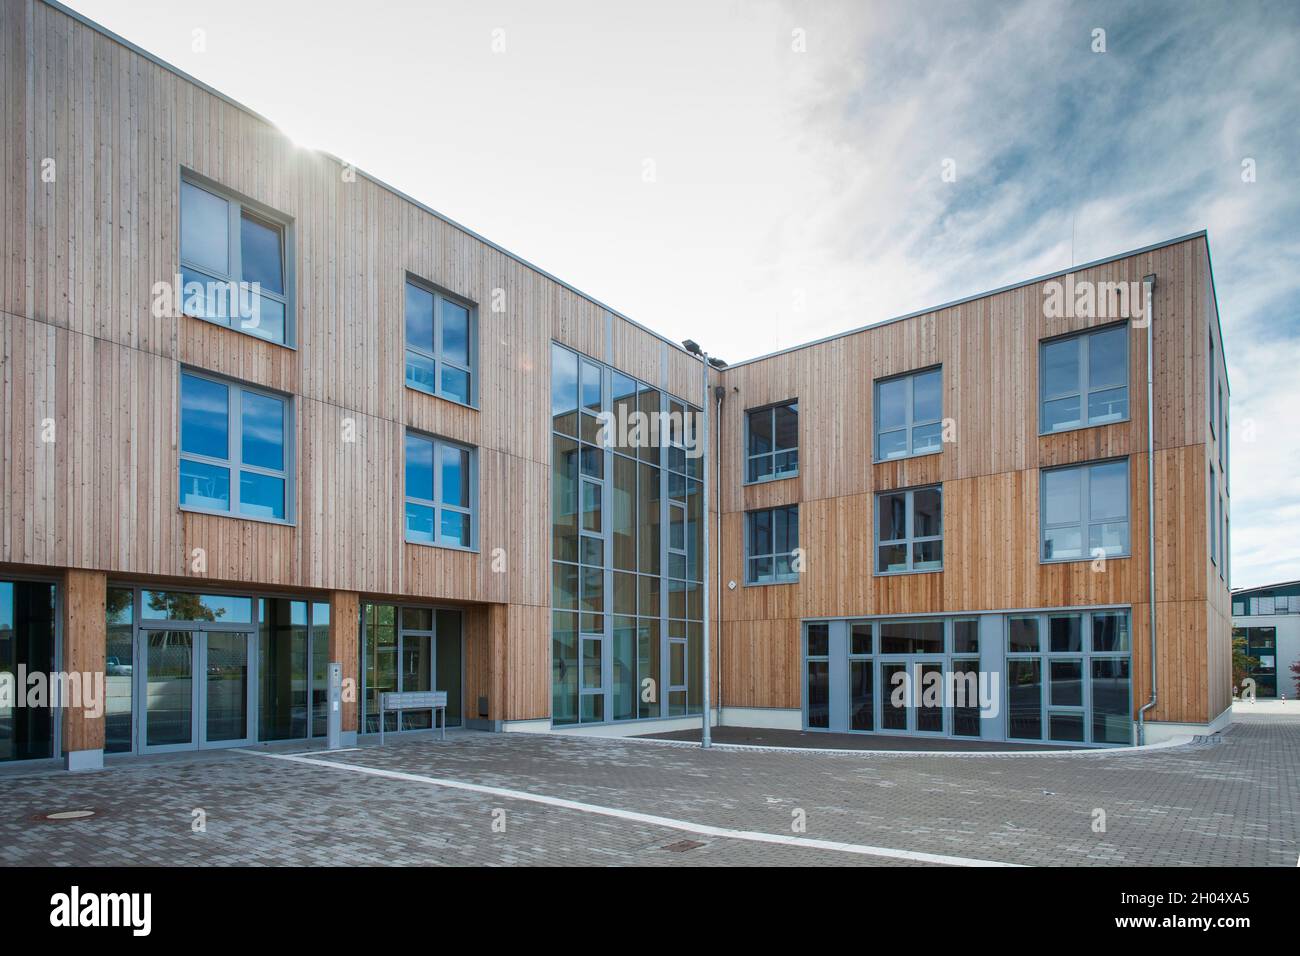 the extension building 'Zukunftsraum' of the private university Witten Herdecke in sustainable timber construction, Witten, North Rhine-Westphalia, Ge Stock Photo